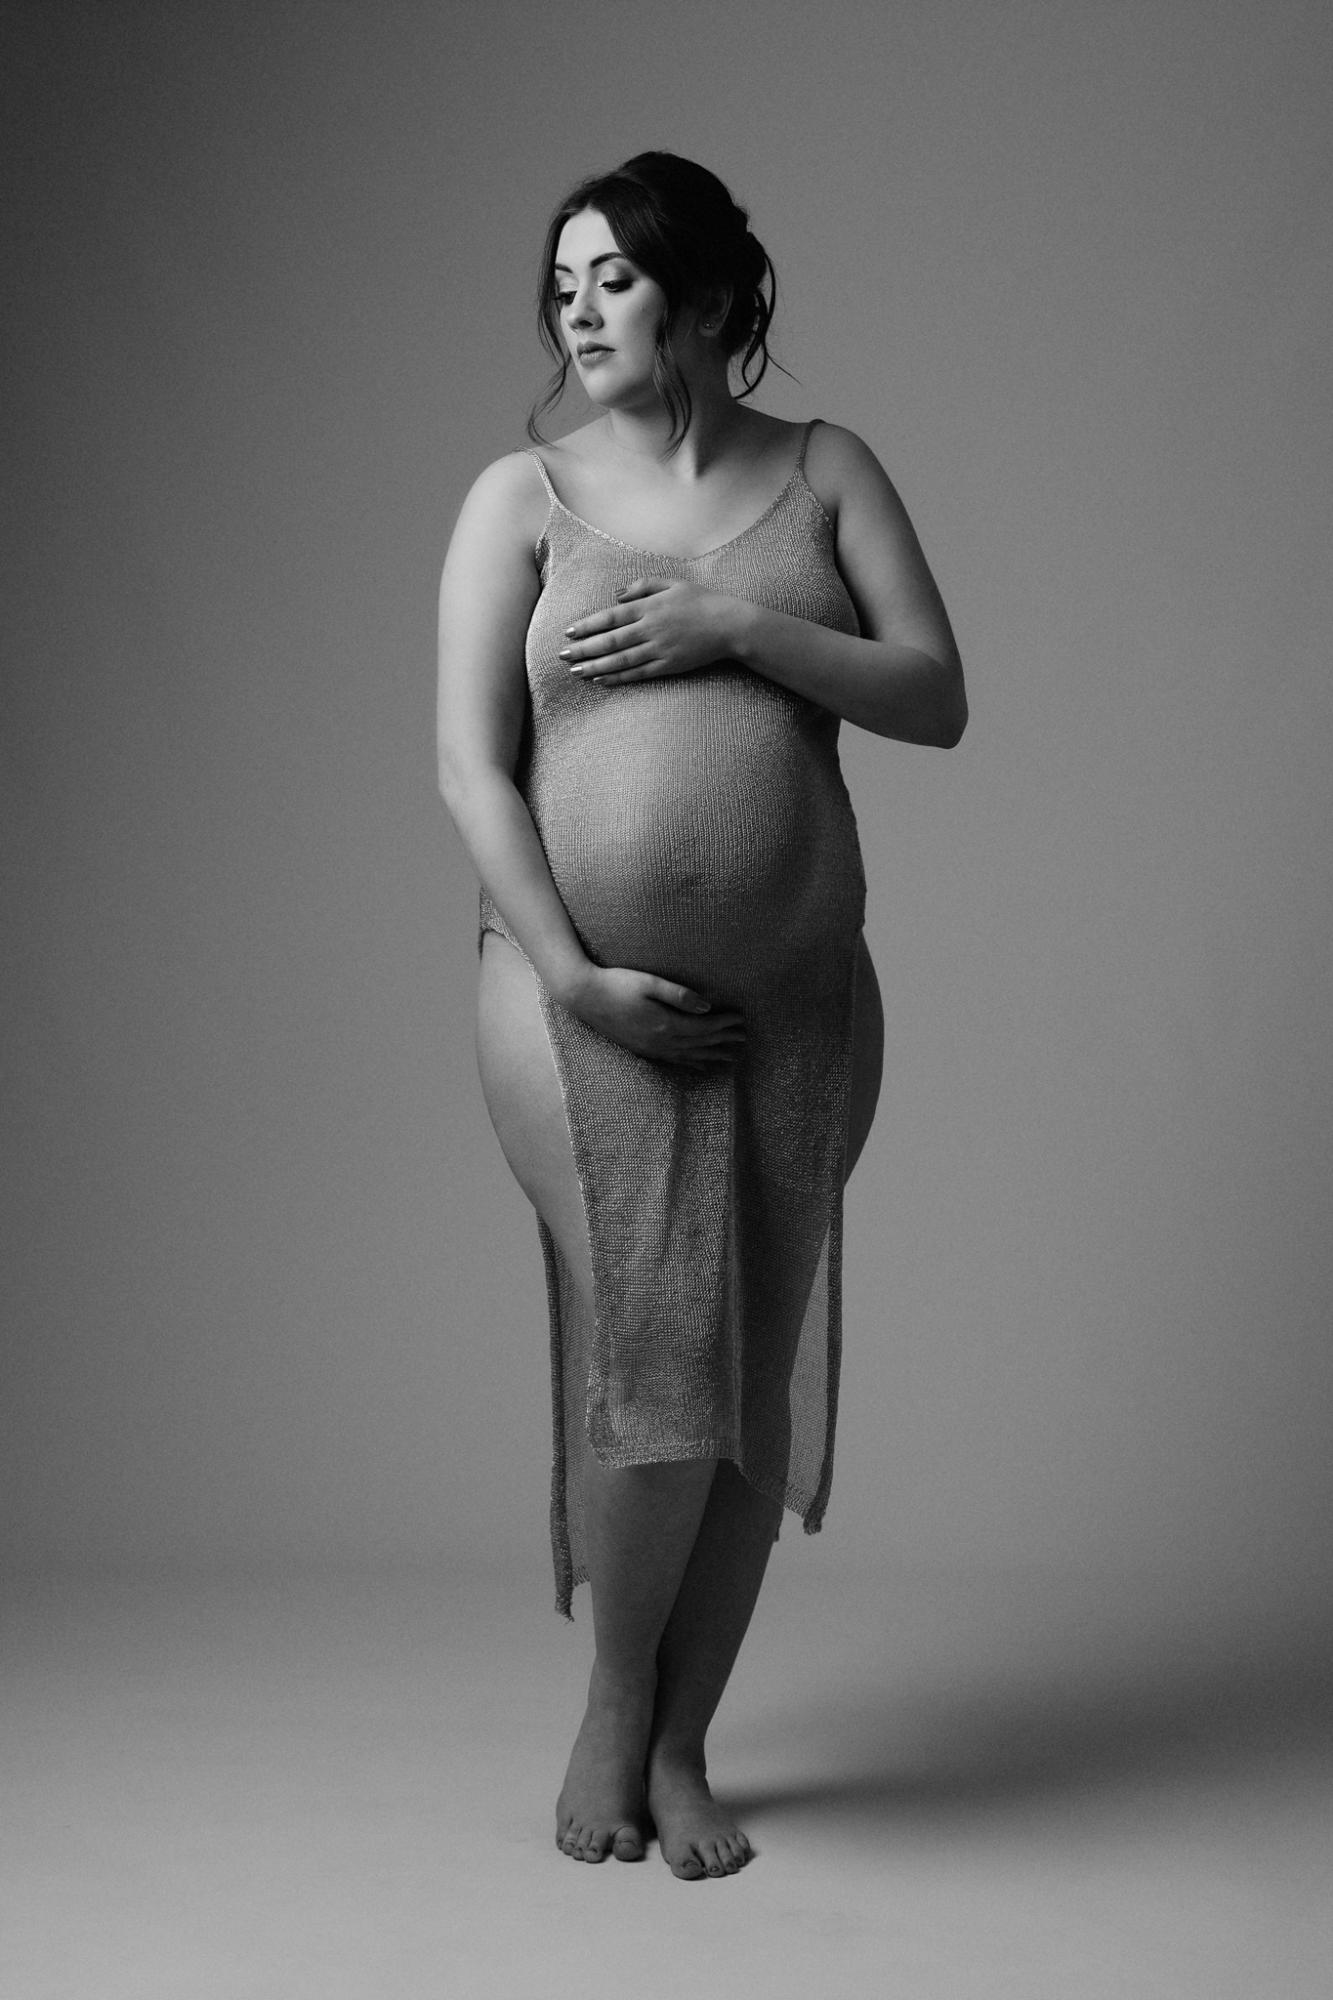 Simple Black and White Maternity Photoshoot Tianna J-Williams Photography